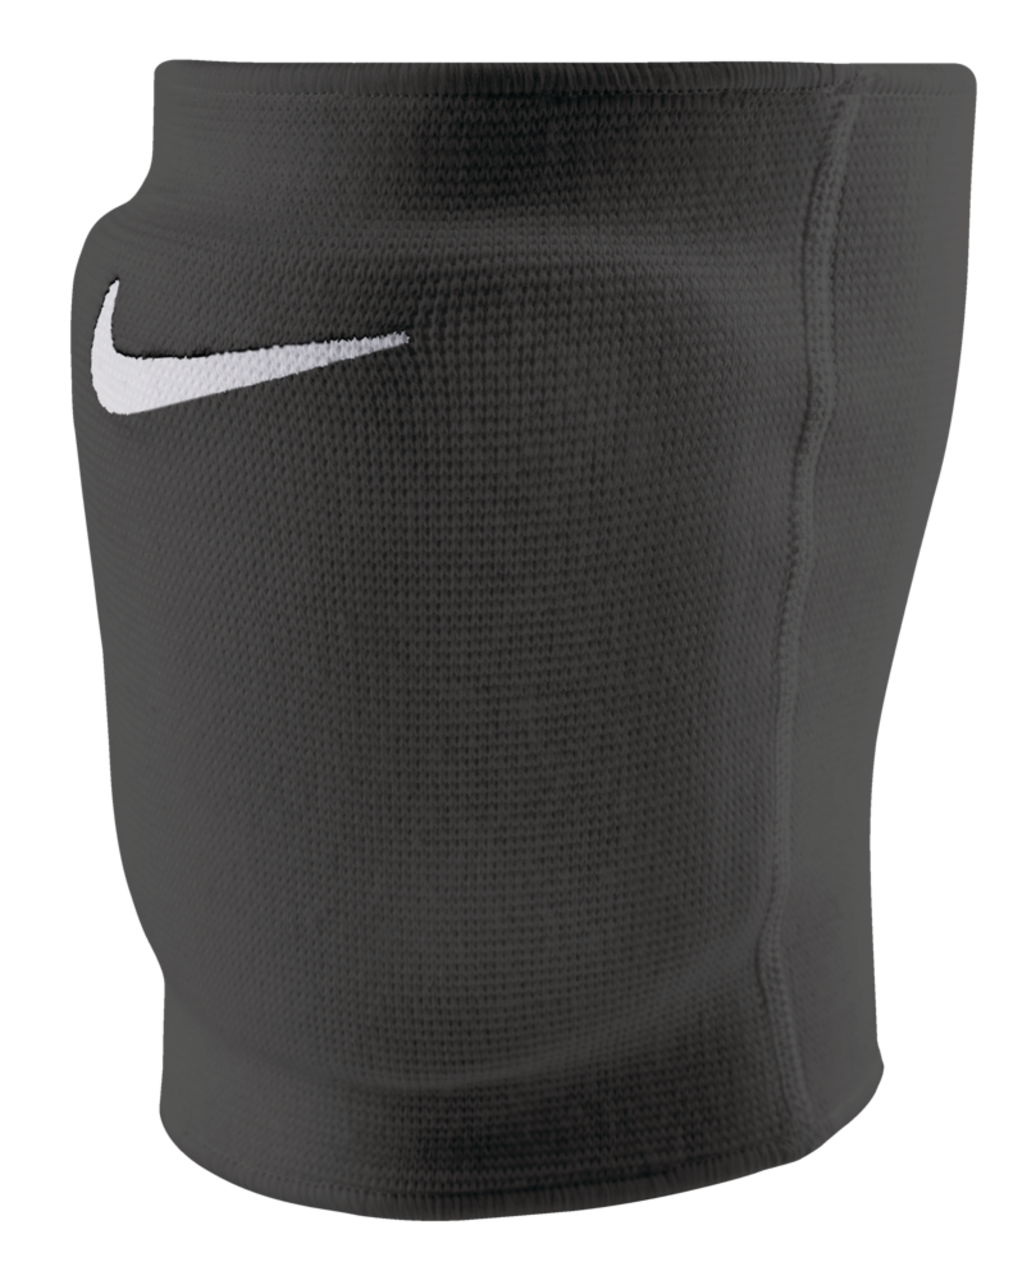 Genouillères de volleyball protectrices unisexe Nike Essential Dri